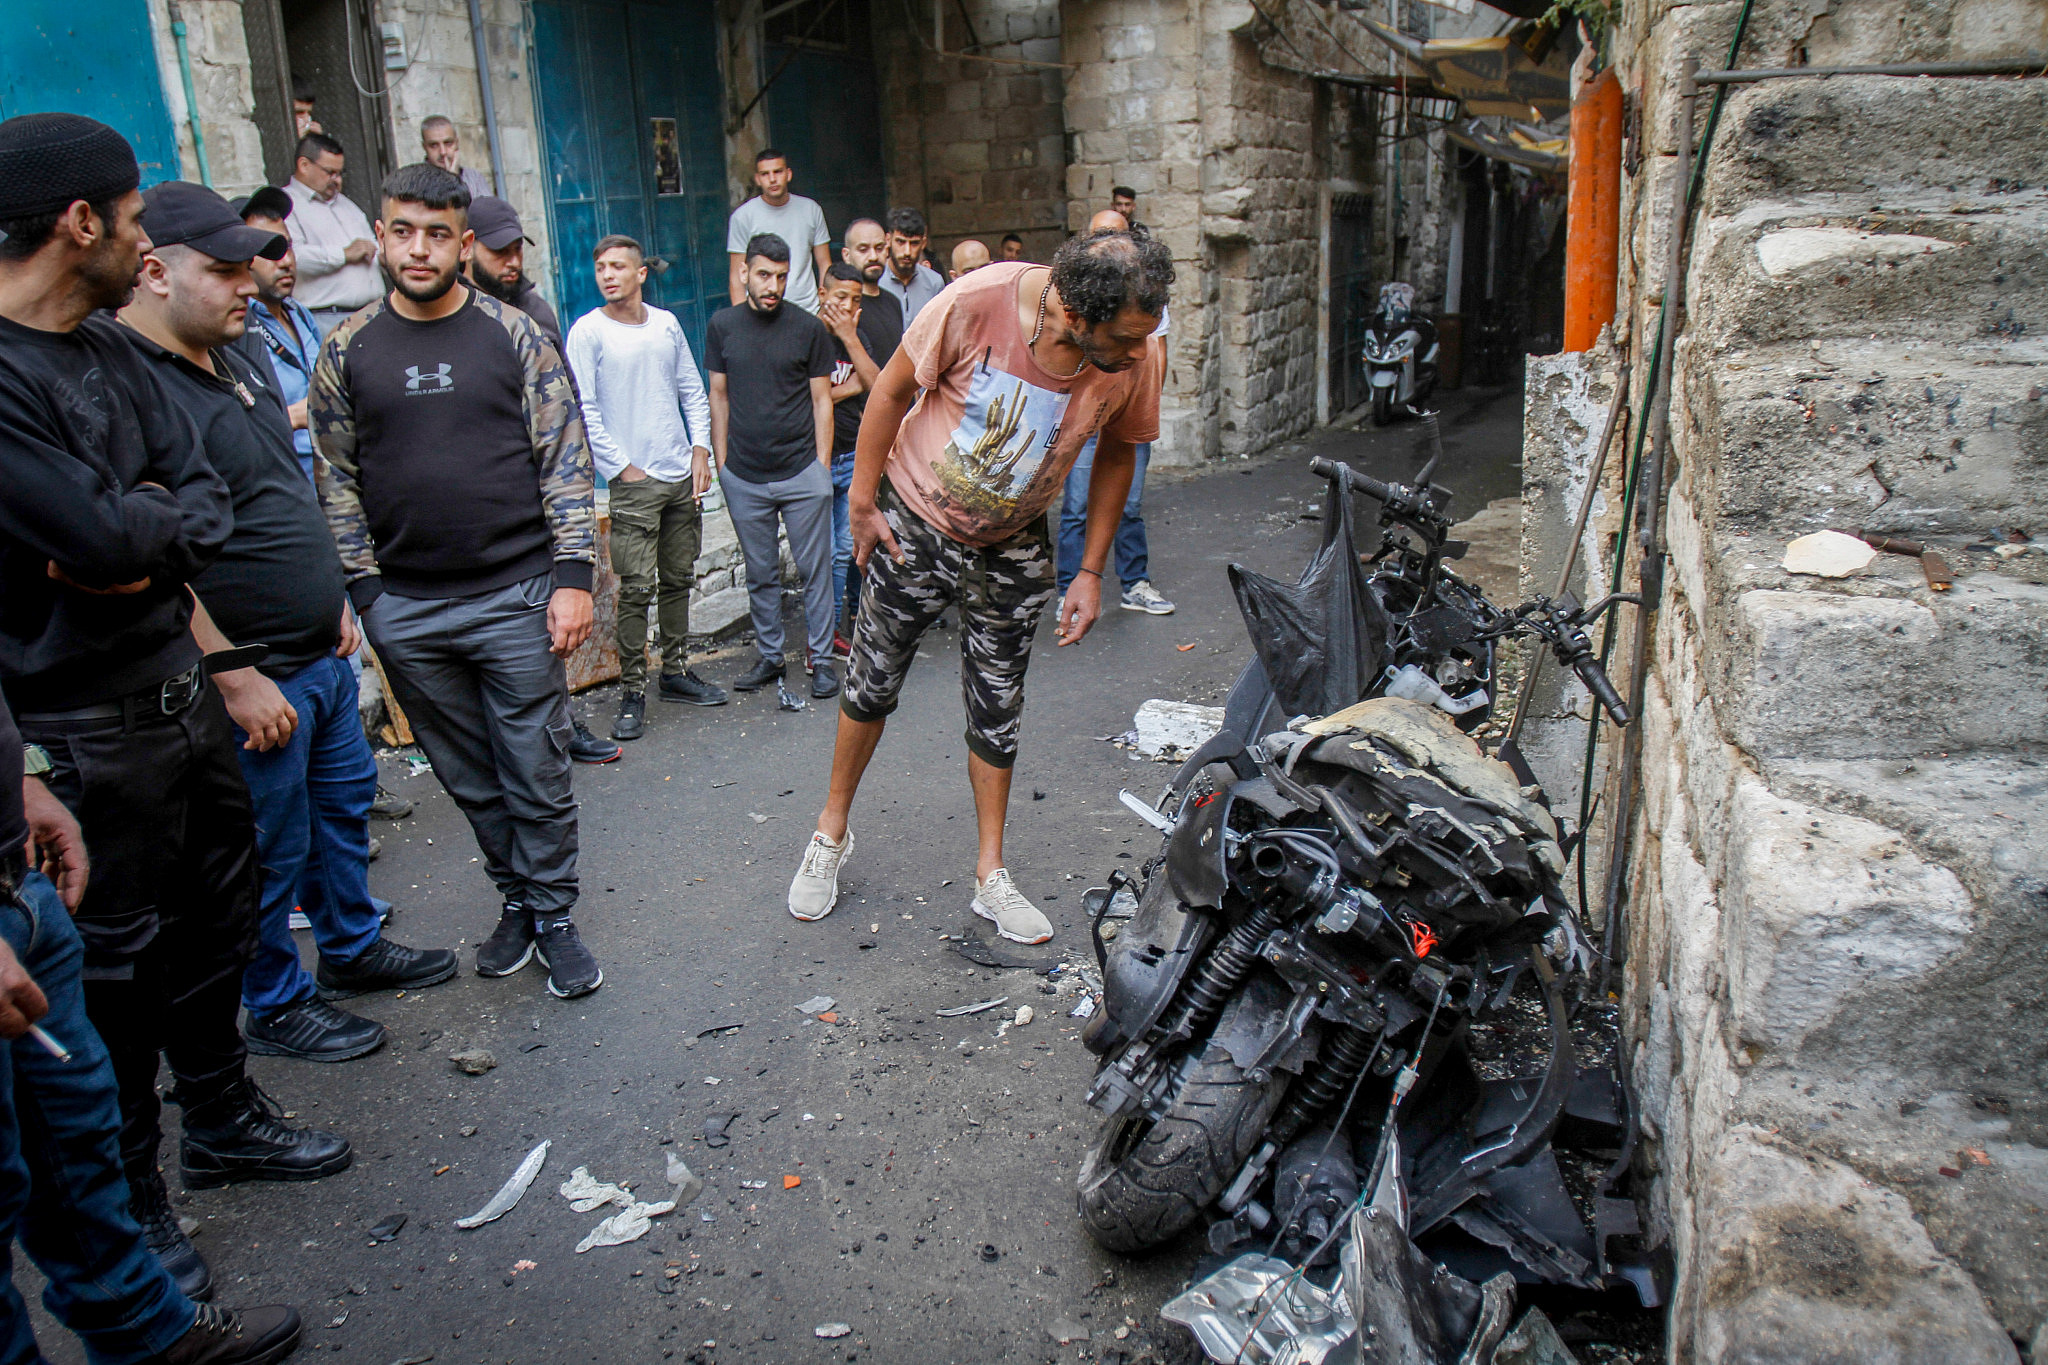 Palestinians inspect a motorbike on which Tamer El Kayani, a member of the Lions' Den who was killed in the Old City of the West Bank city of Nablus, October 23, 2022. (Nasser Ishtayeh/Flash90)